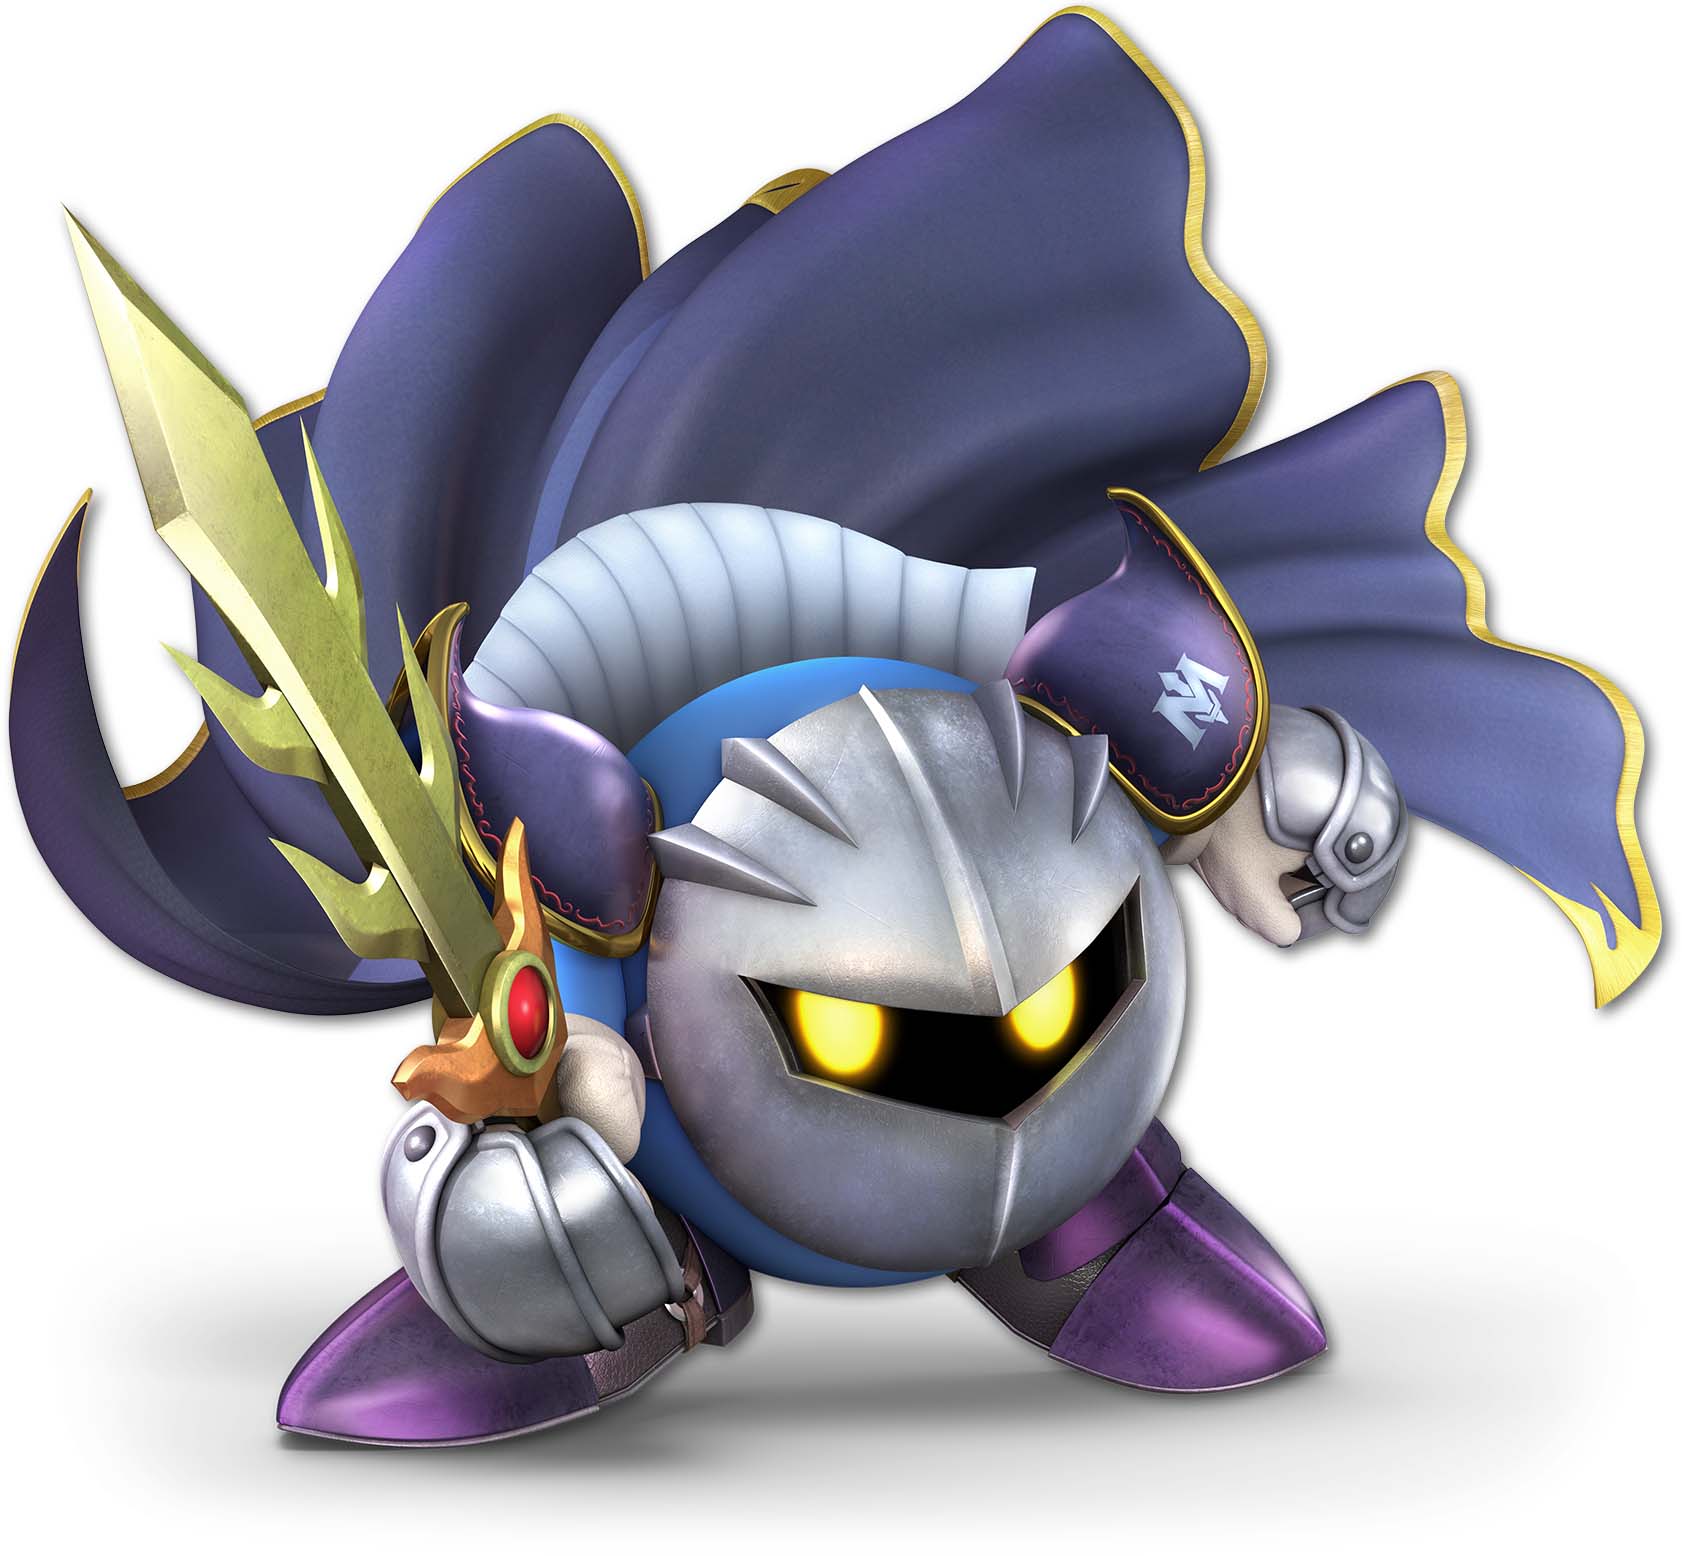 How to counter Meta Knight with Ivysaur in Super Smash Bros. Ultimate